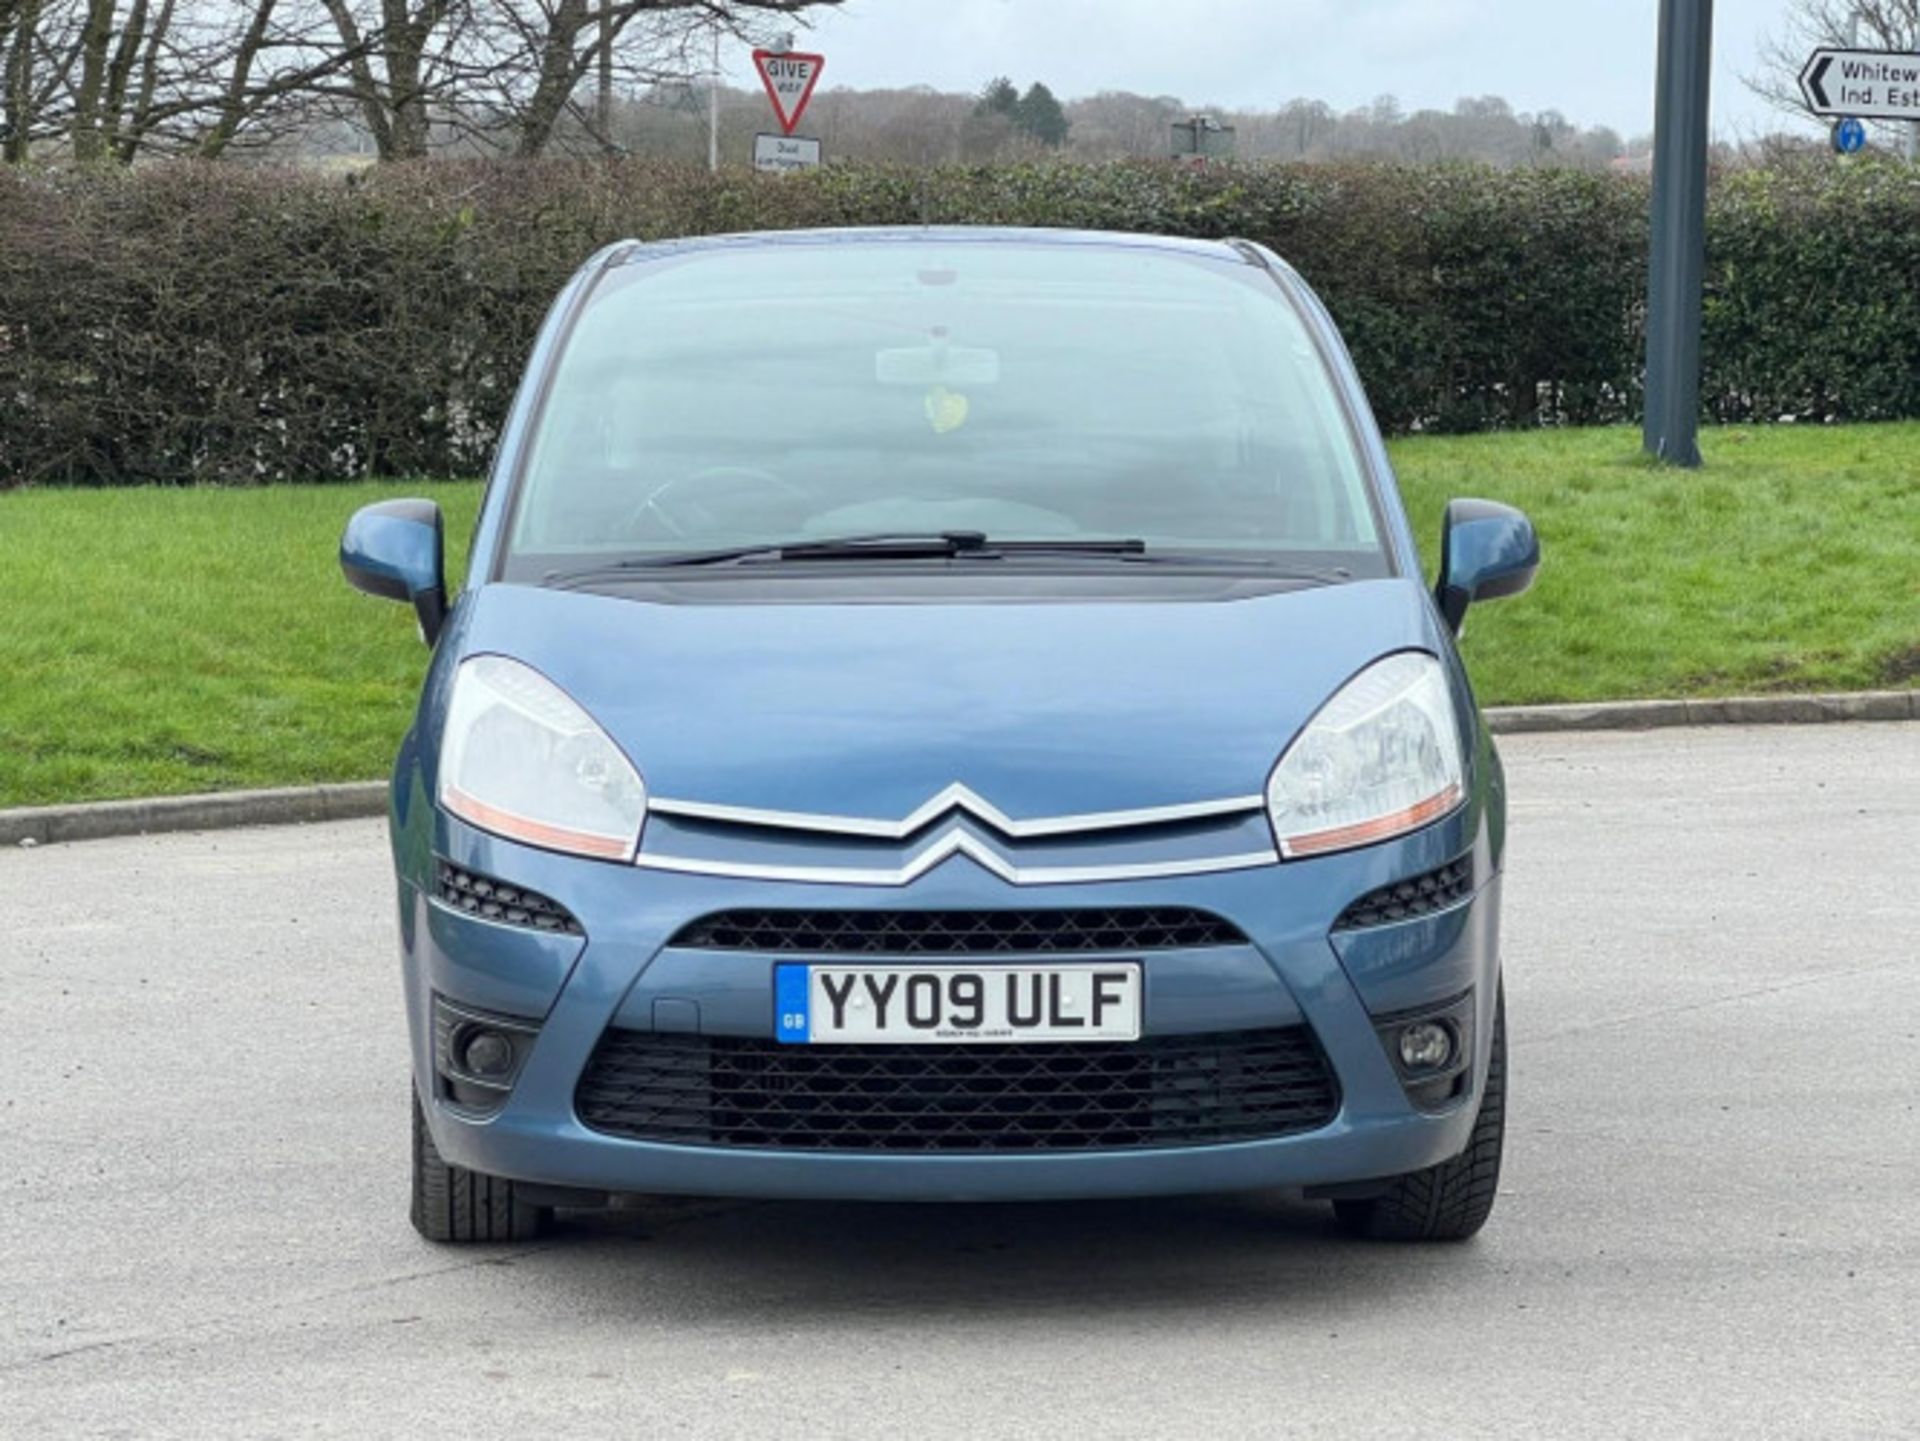 2009 CITROEN C4 PICASSO 1.6 HDI VTR+ EGS6 5DR >>--NO VAT ON HAMMER--<< - Image 122 of 123